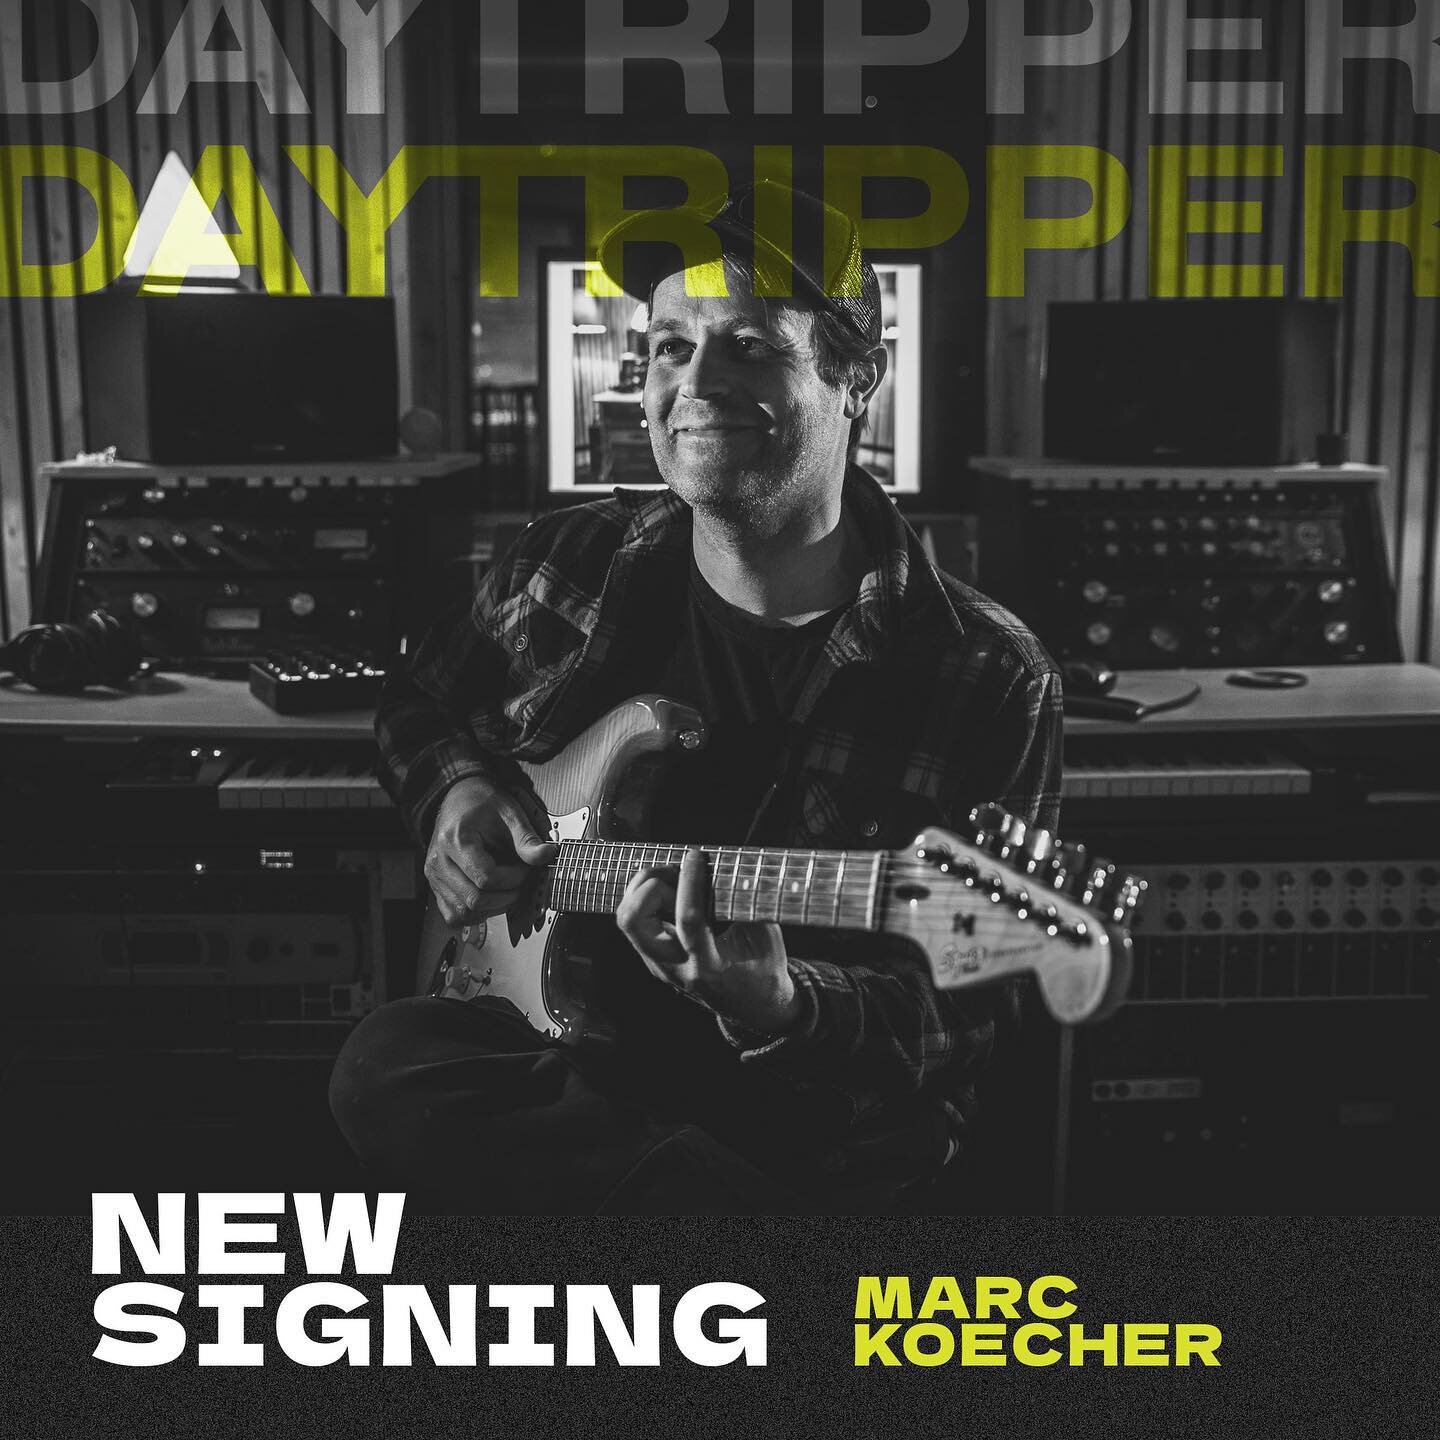 Stoked to welcome Marc to the Daytripper fam! Marc is a music producer, writer/composer, engineer and multi-instrumentalist working out of Toronto. His approach to production and musical collaboration comes from a passion for finding unique sonic sig